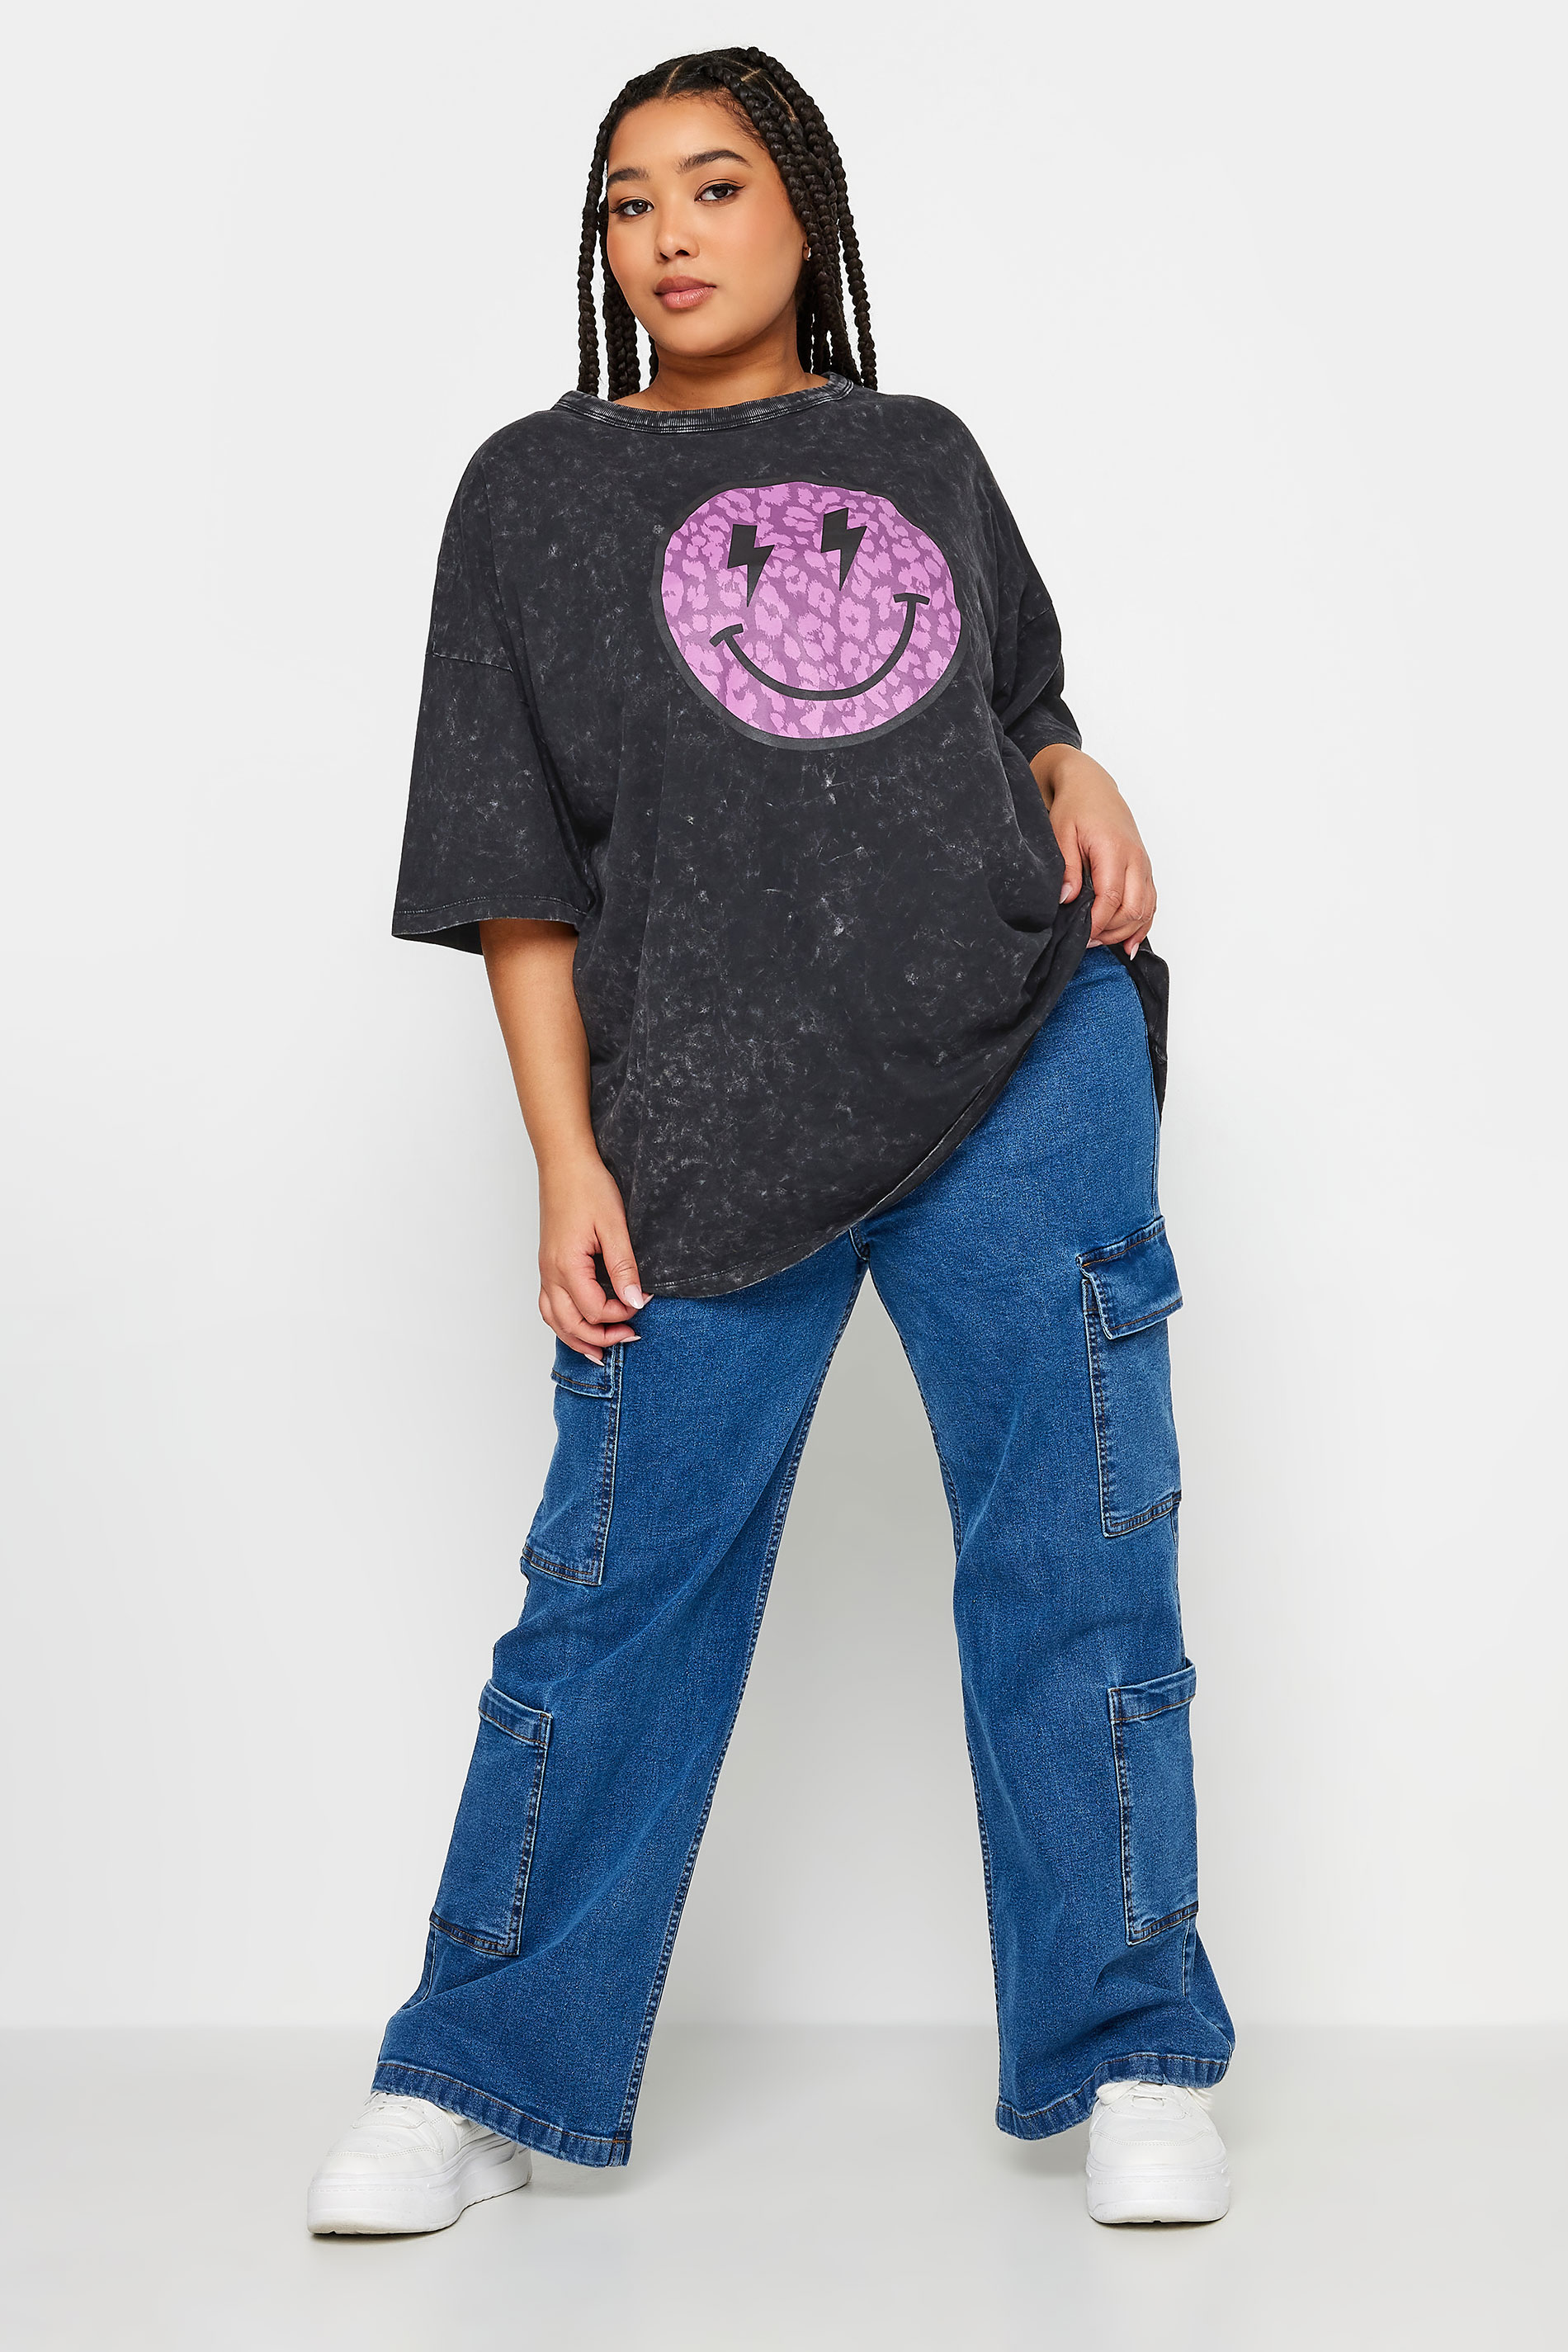 YOURS Curve Plus Size Charcoal Grey & Black Leopard Print Smiley Face T-Shirt | Yours Clothing  3